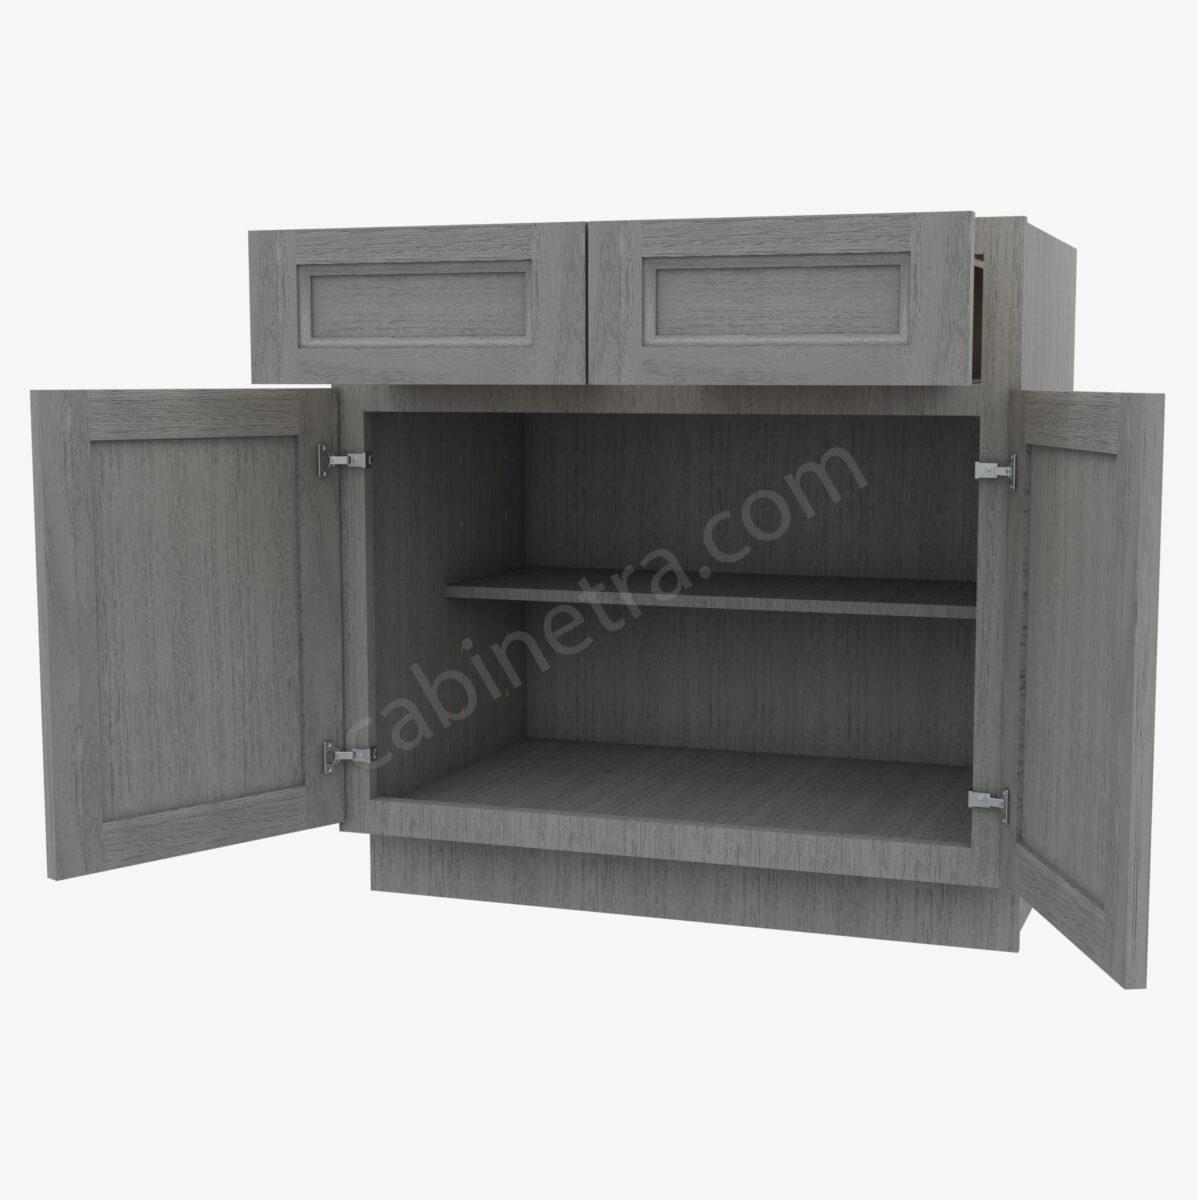 TG B33B 5 Forevermark Midtown Grey Cabinetra scaled